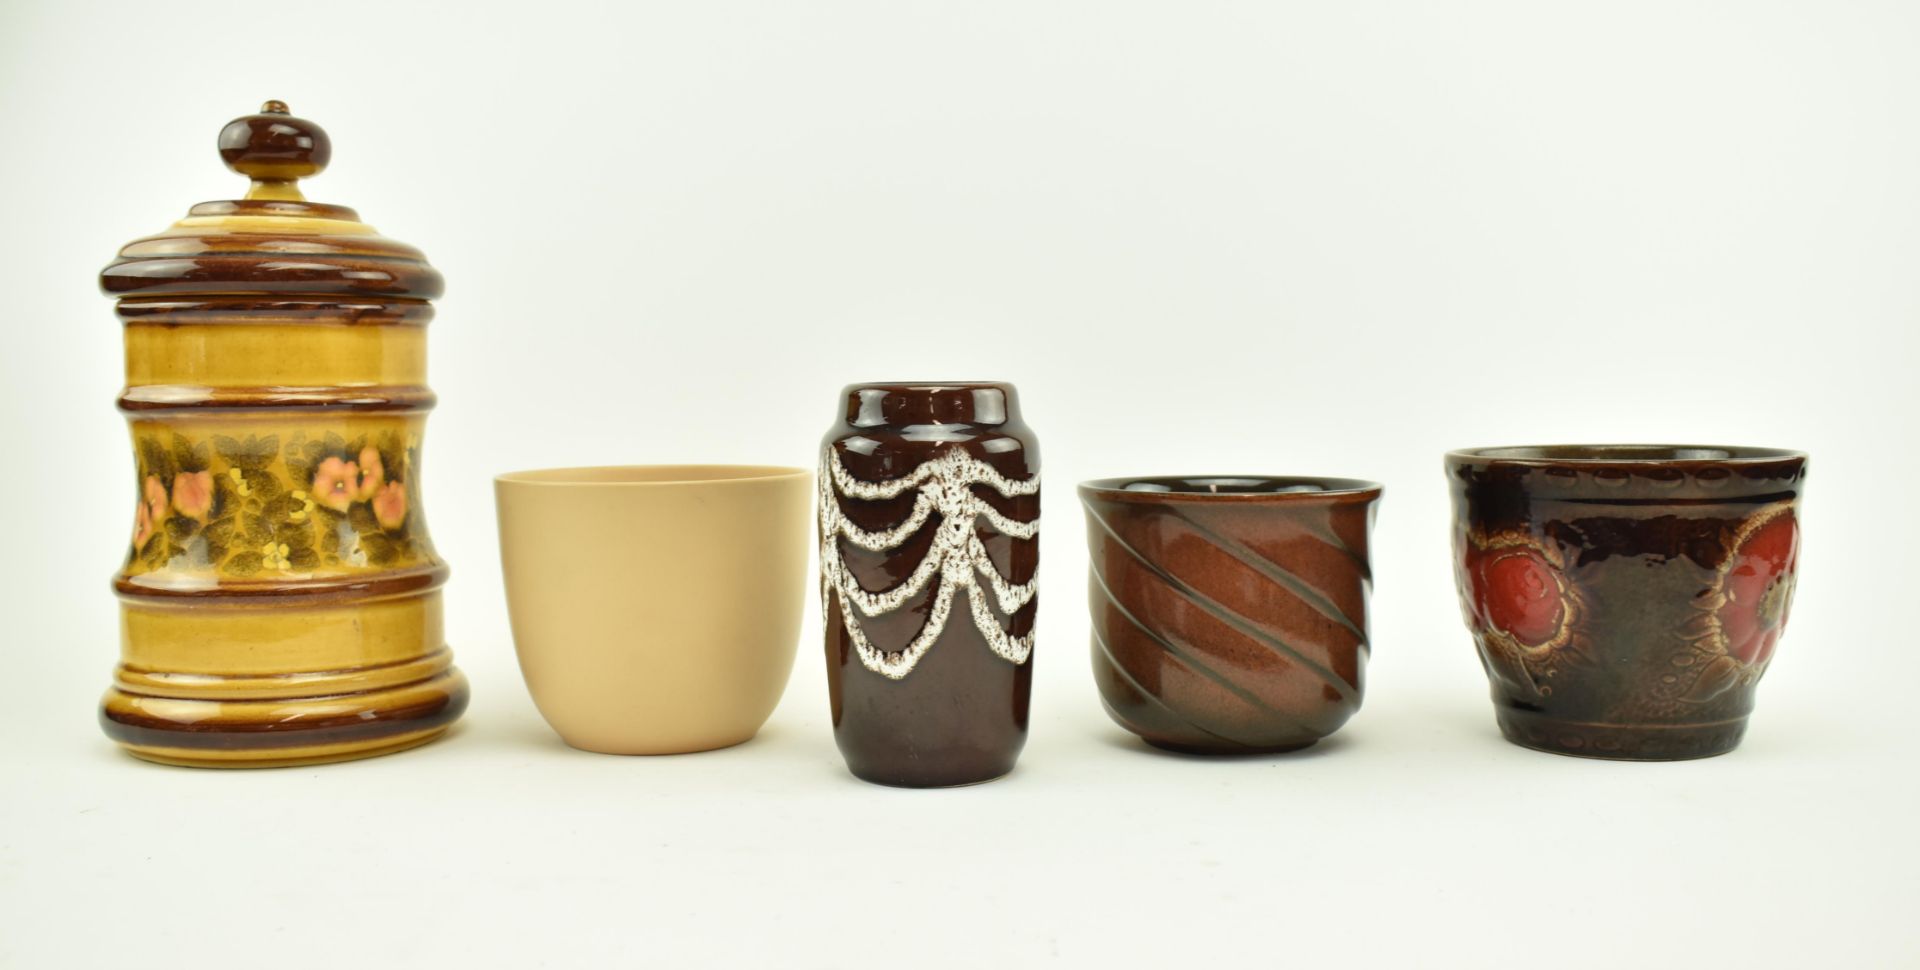 COLLECTION OF FIVE WEST GERMAN POTTERY PLANT POTS